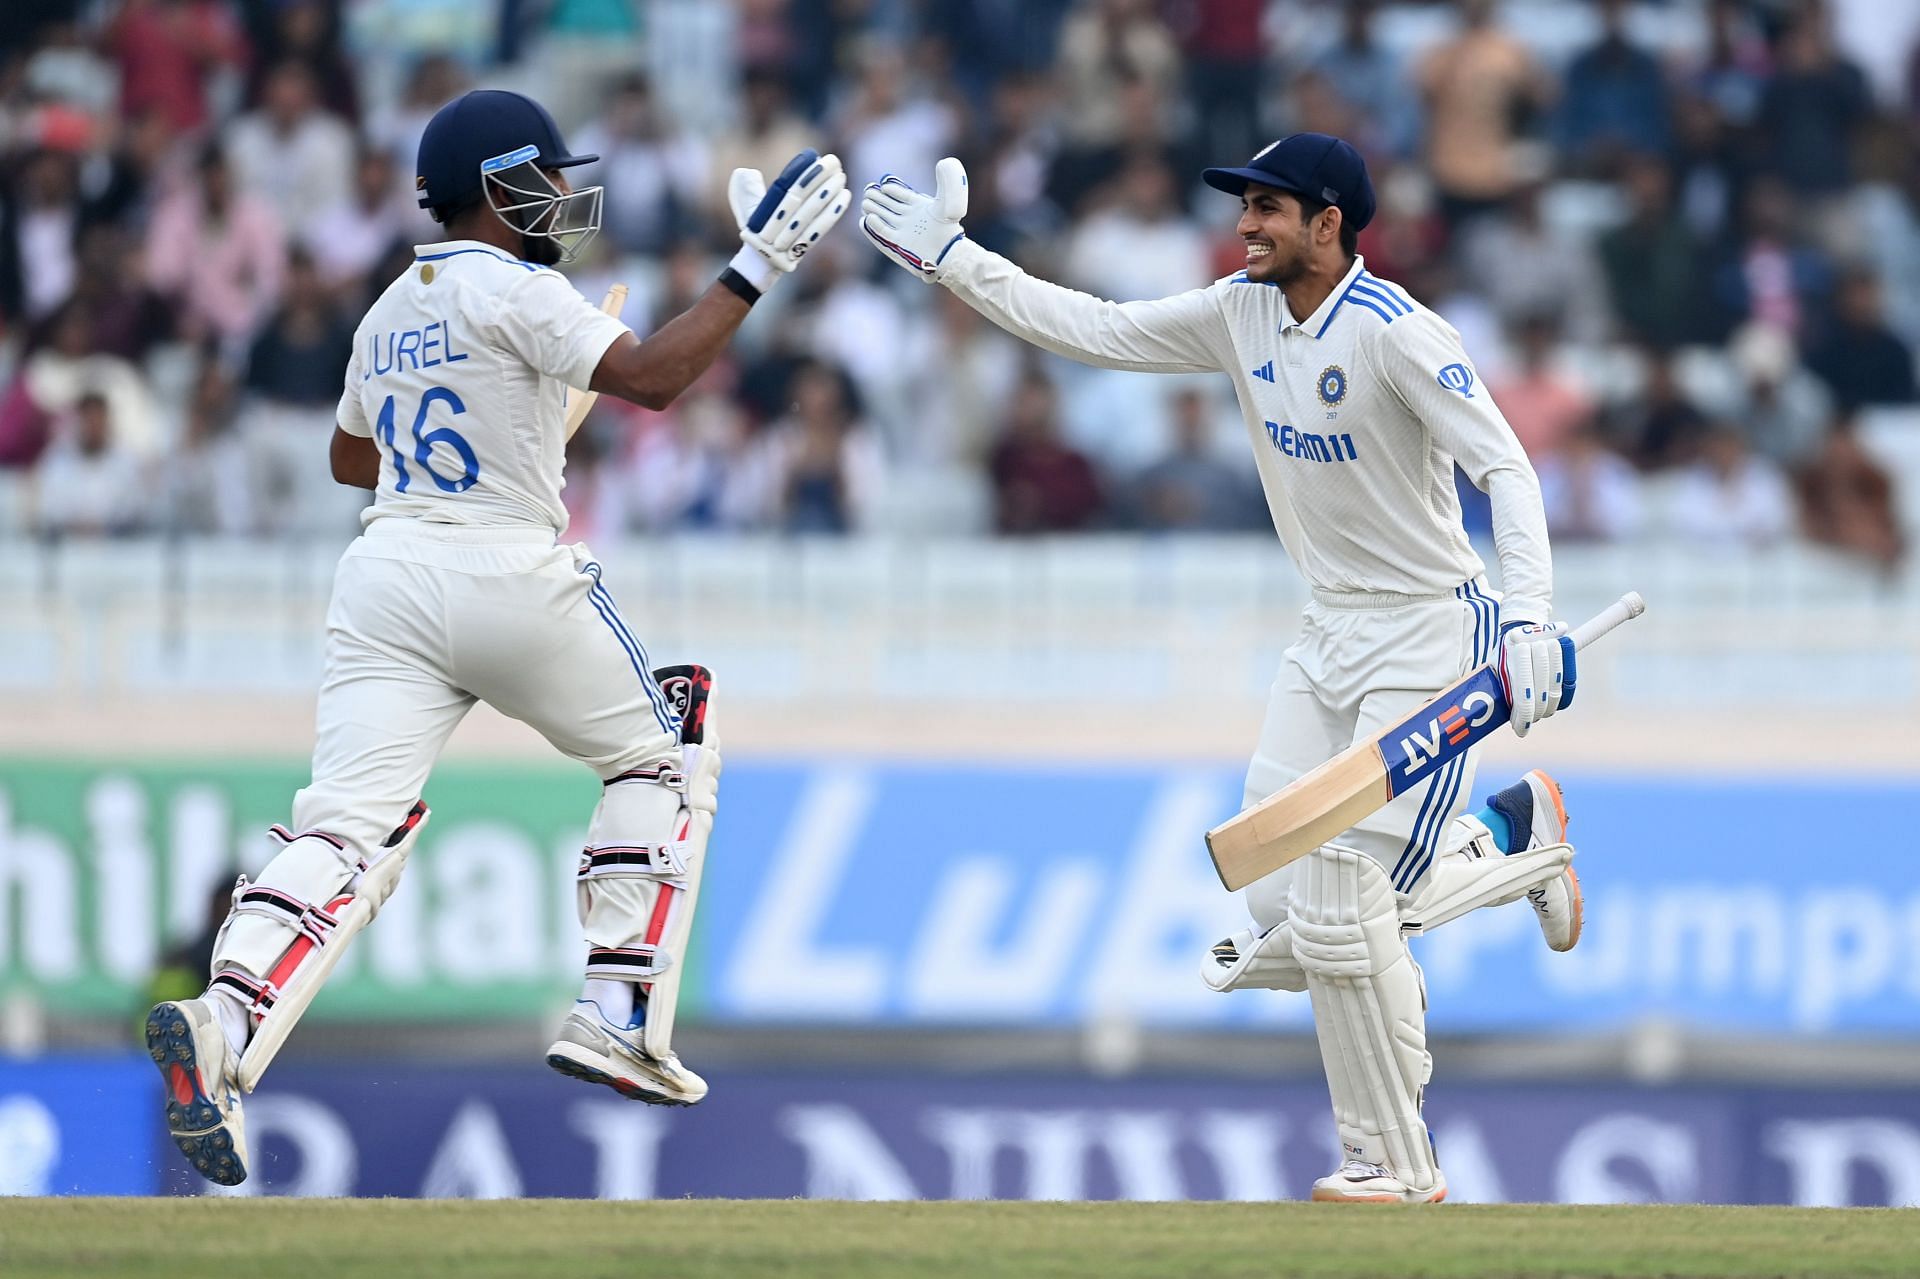 Jurel and Gill celebrate: India v England - 4th Test Match: Day Four